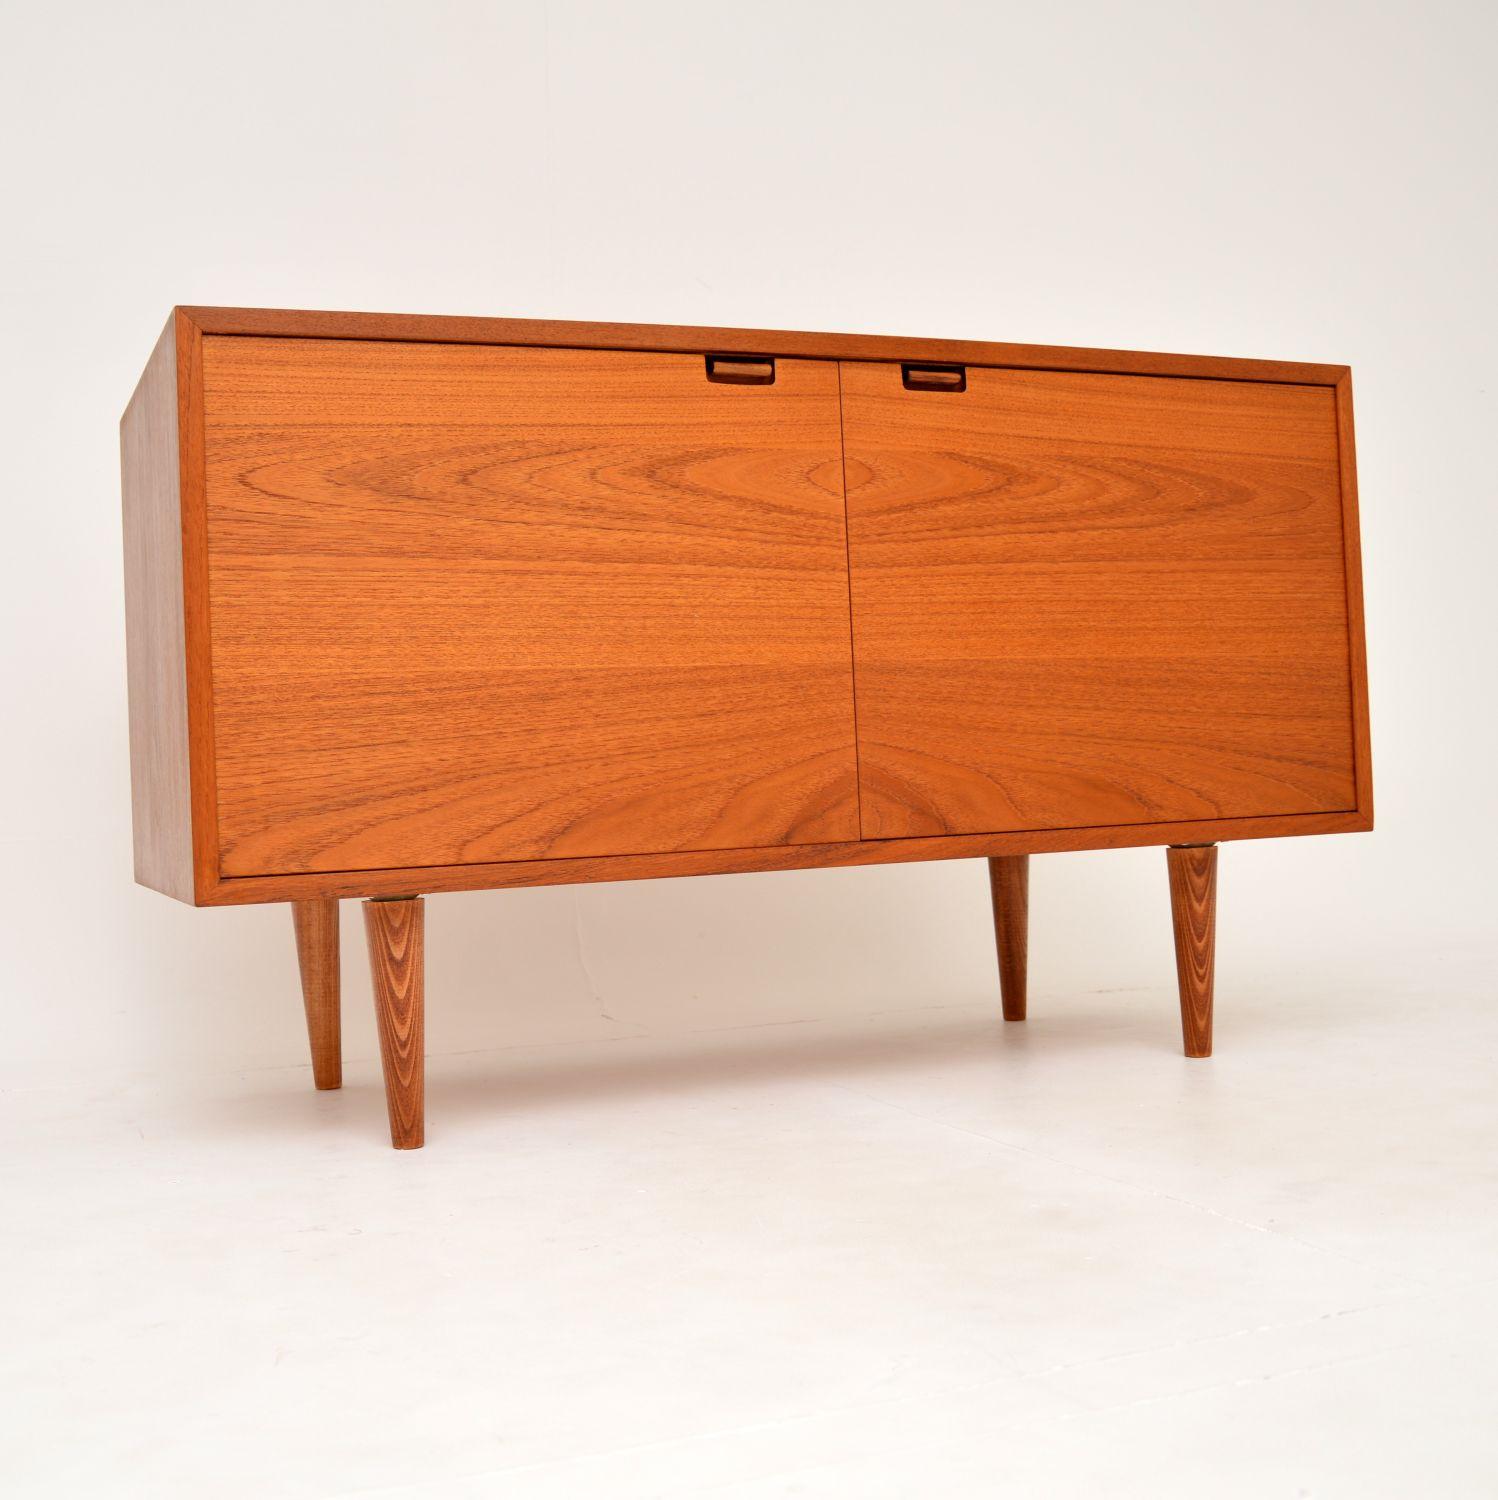 A beautiful and petite Danish teak sideboard on legs. This was made in Denmark, it dates from around the 1960’s.

This is a very useful size, low and not too wide, with plenty of storage space. The handles are rosewood and have a clever mechanism